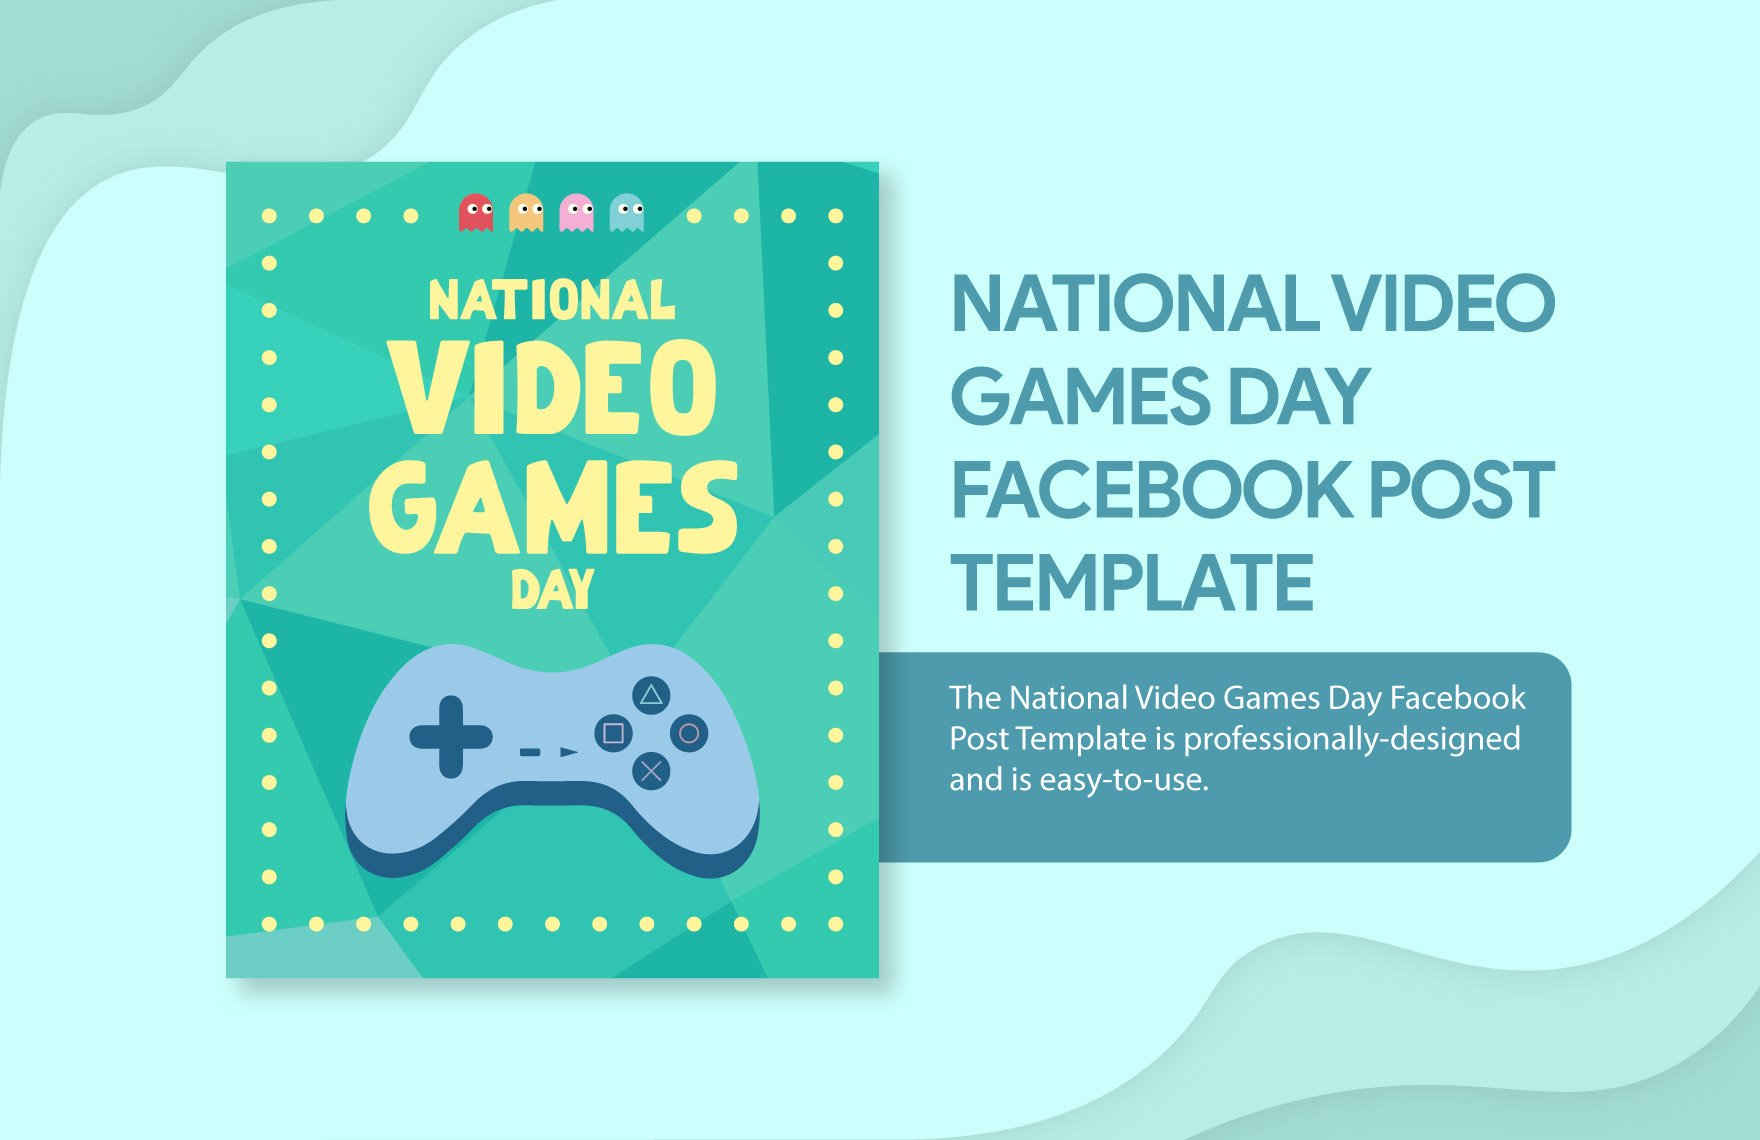 Free National Video Games Day Facebook Post Template in Illustrator, PSD, PNG